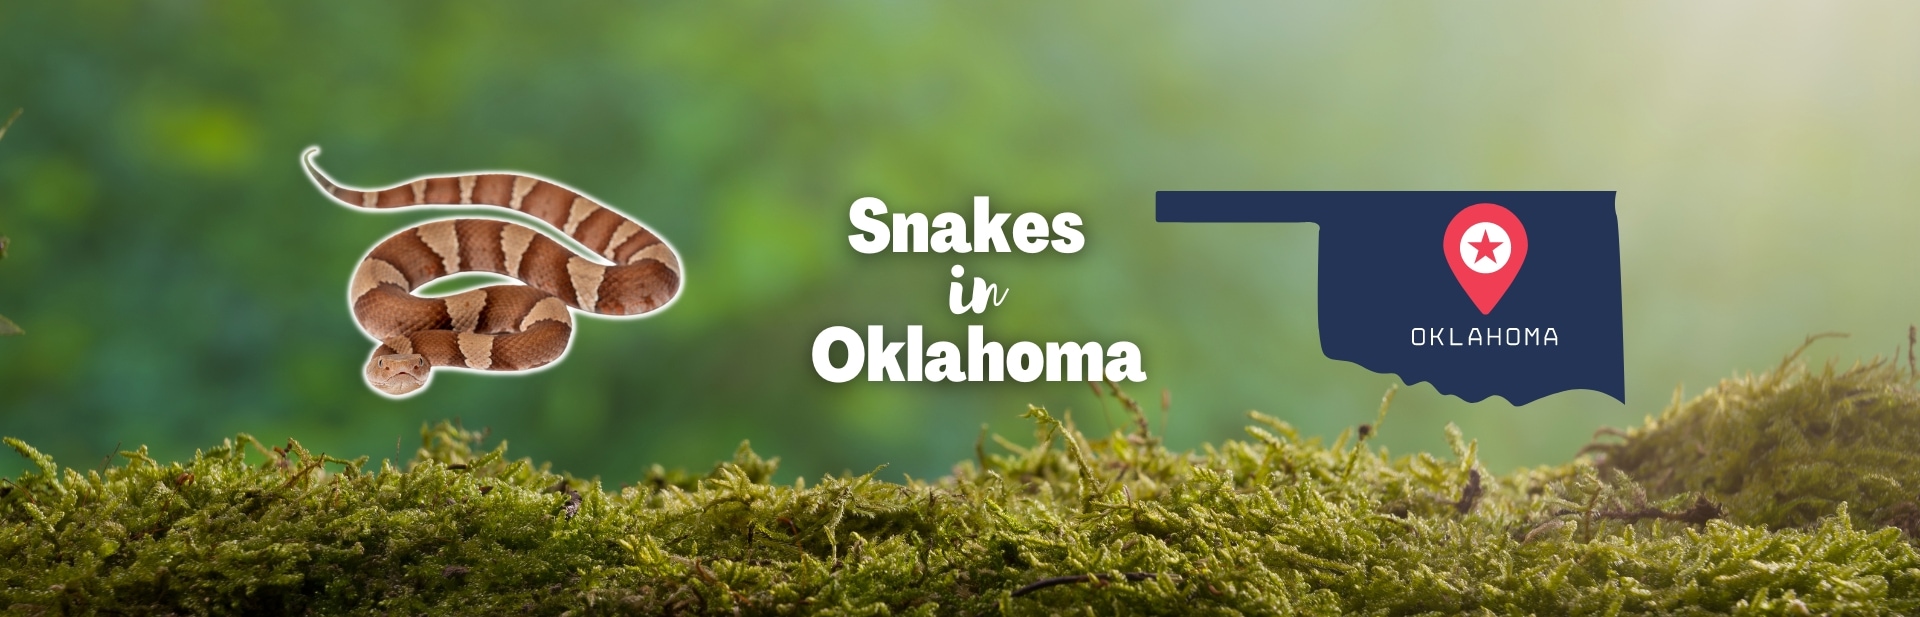 Snakes in Oklahoma: All 48 Types of Snakes Found in Oklahoma